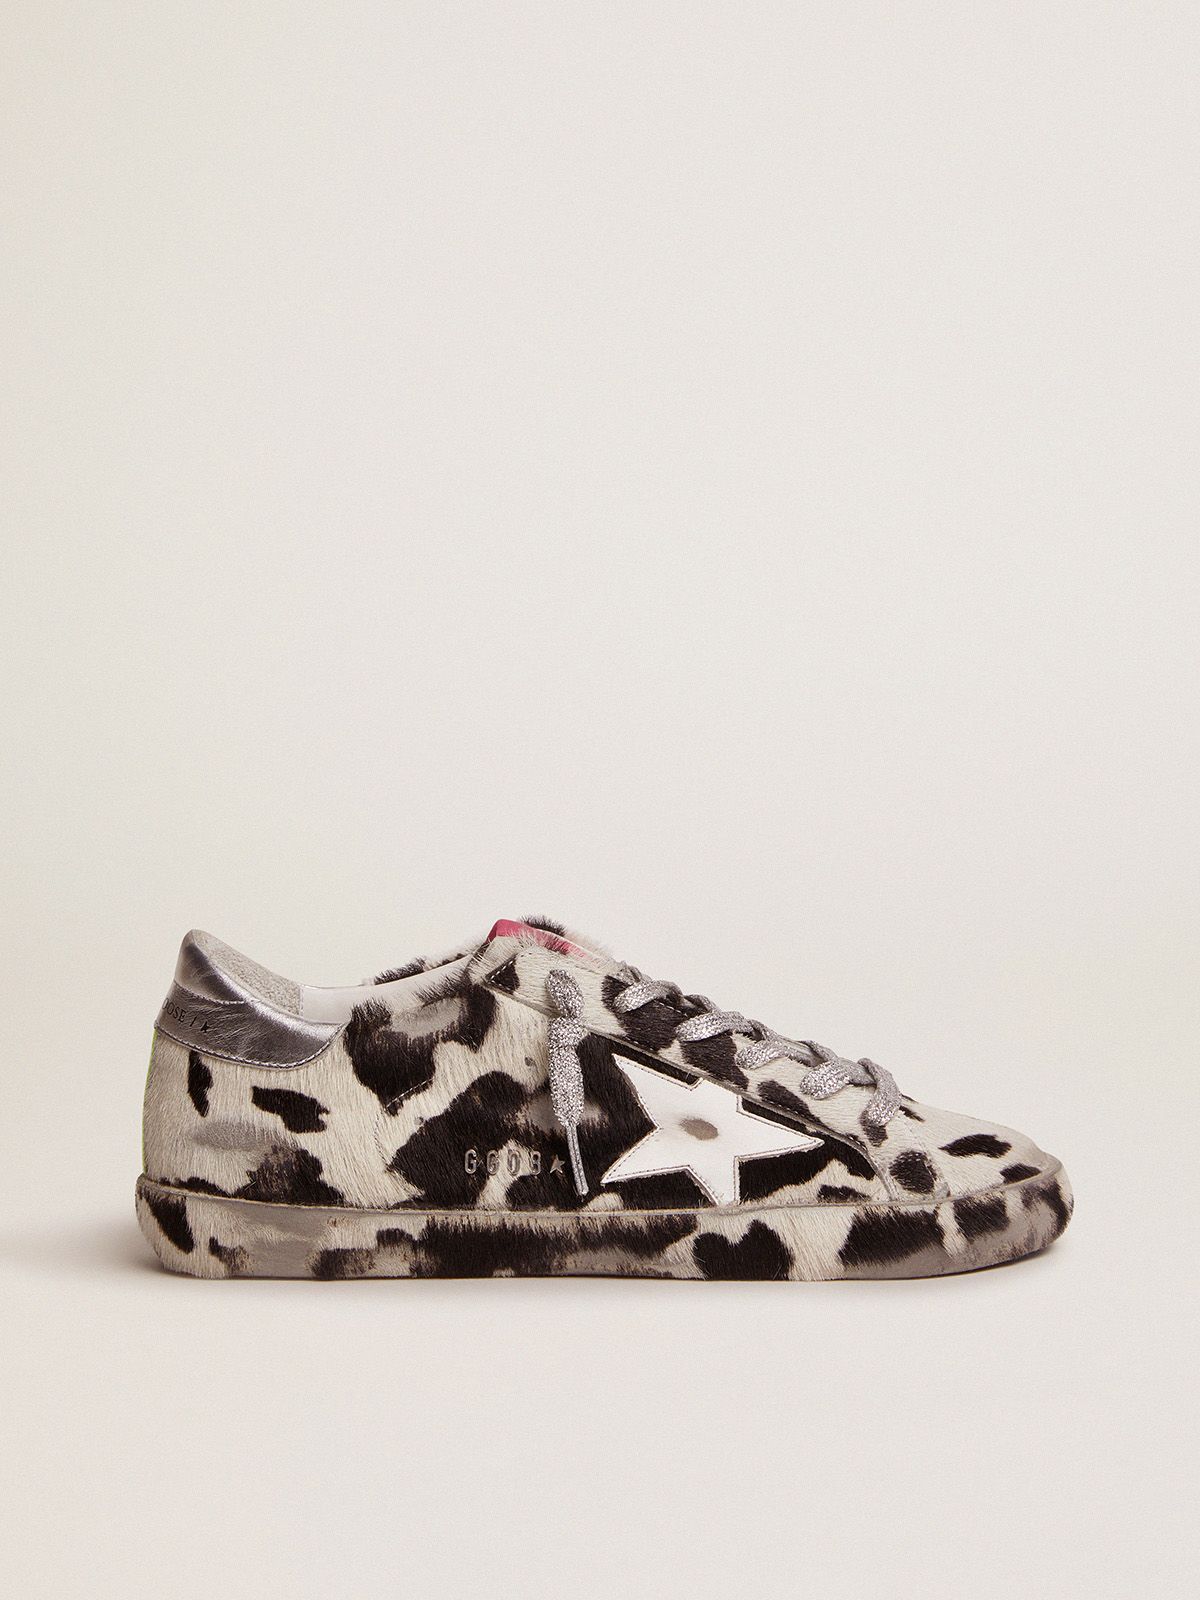 Super-Star LAB sneakers in cow-print pony skin and white leather star